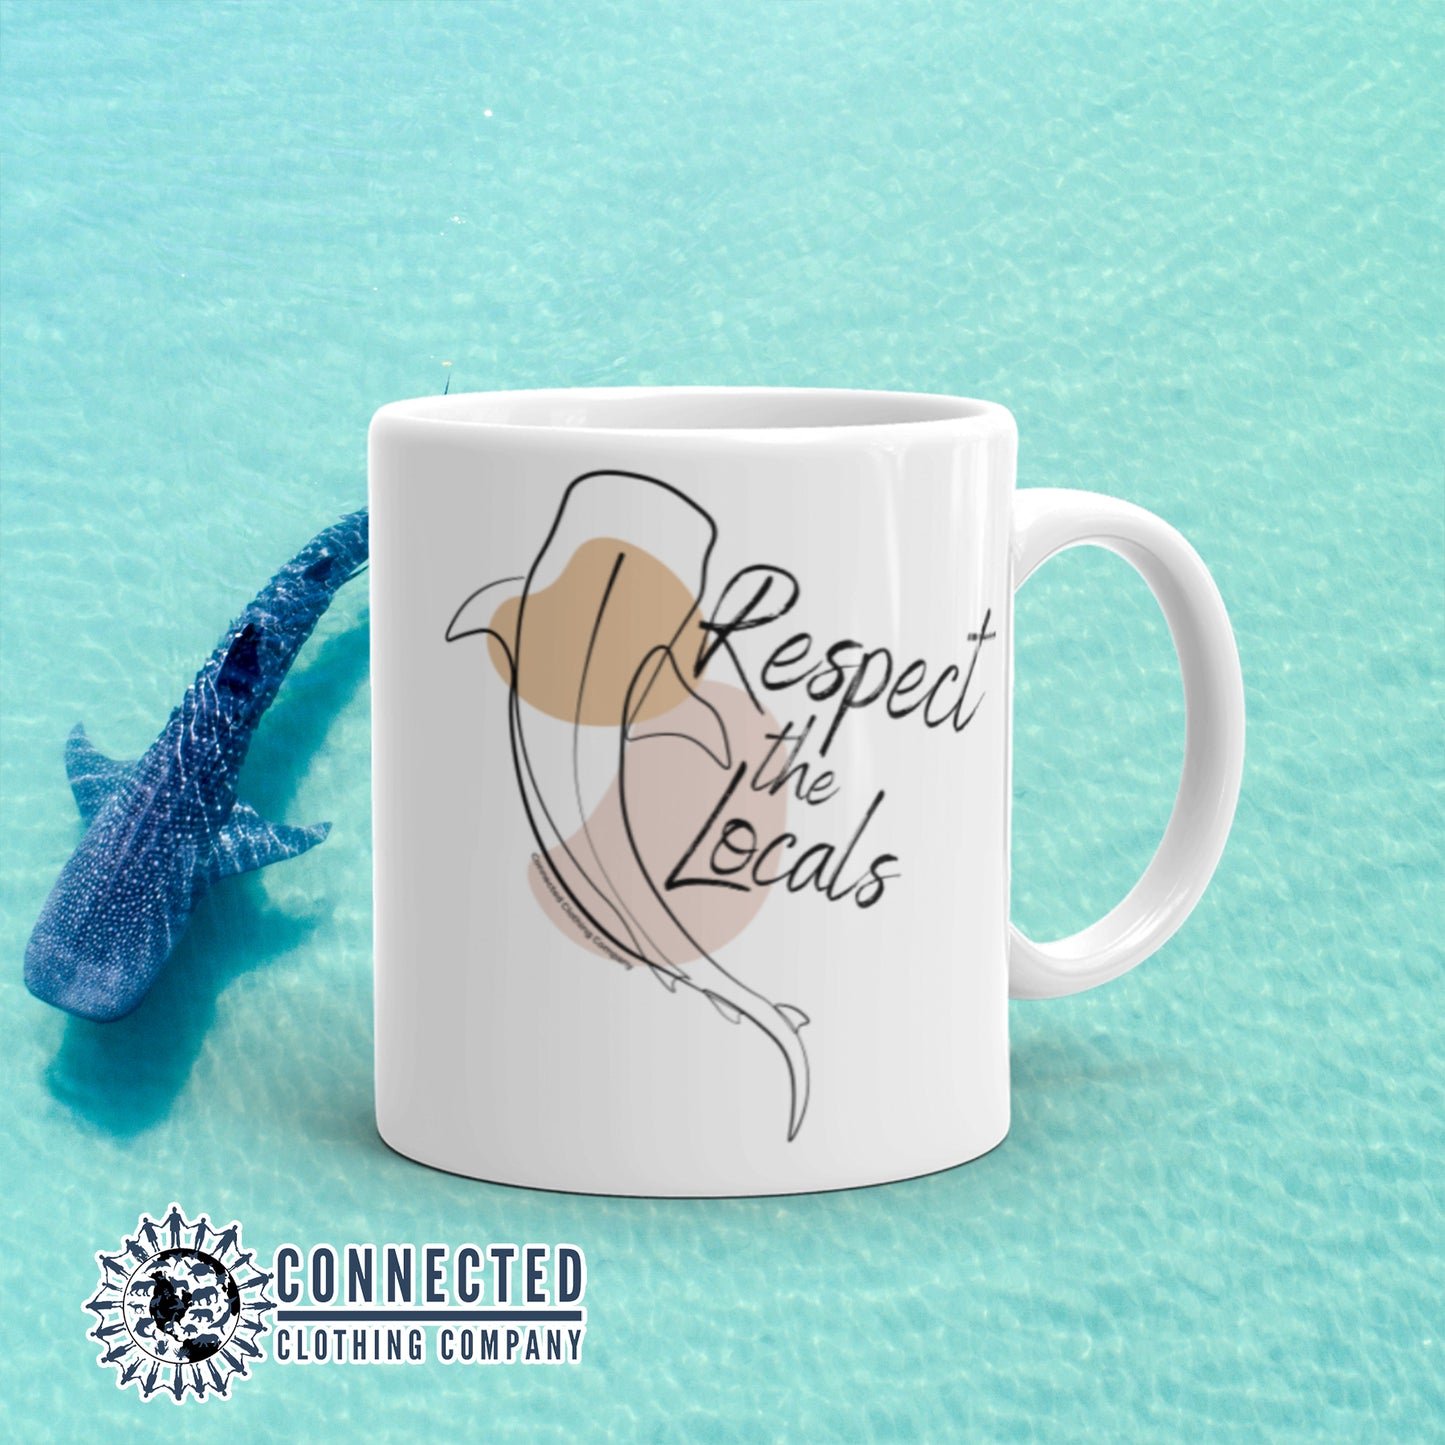 White Respect The Locals Whale Shark Classic Mug - Connected Clothing Company - Ethically and Sustainably Made - 10% of profits donated to shark conservation and ocean conservation